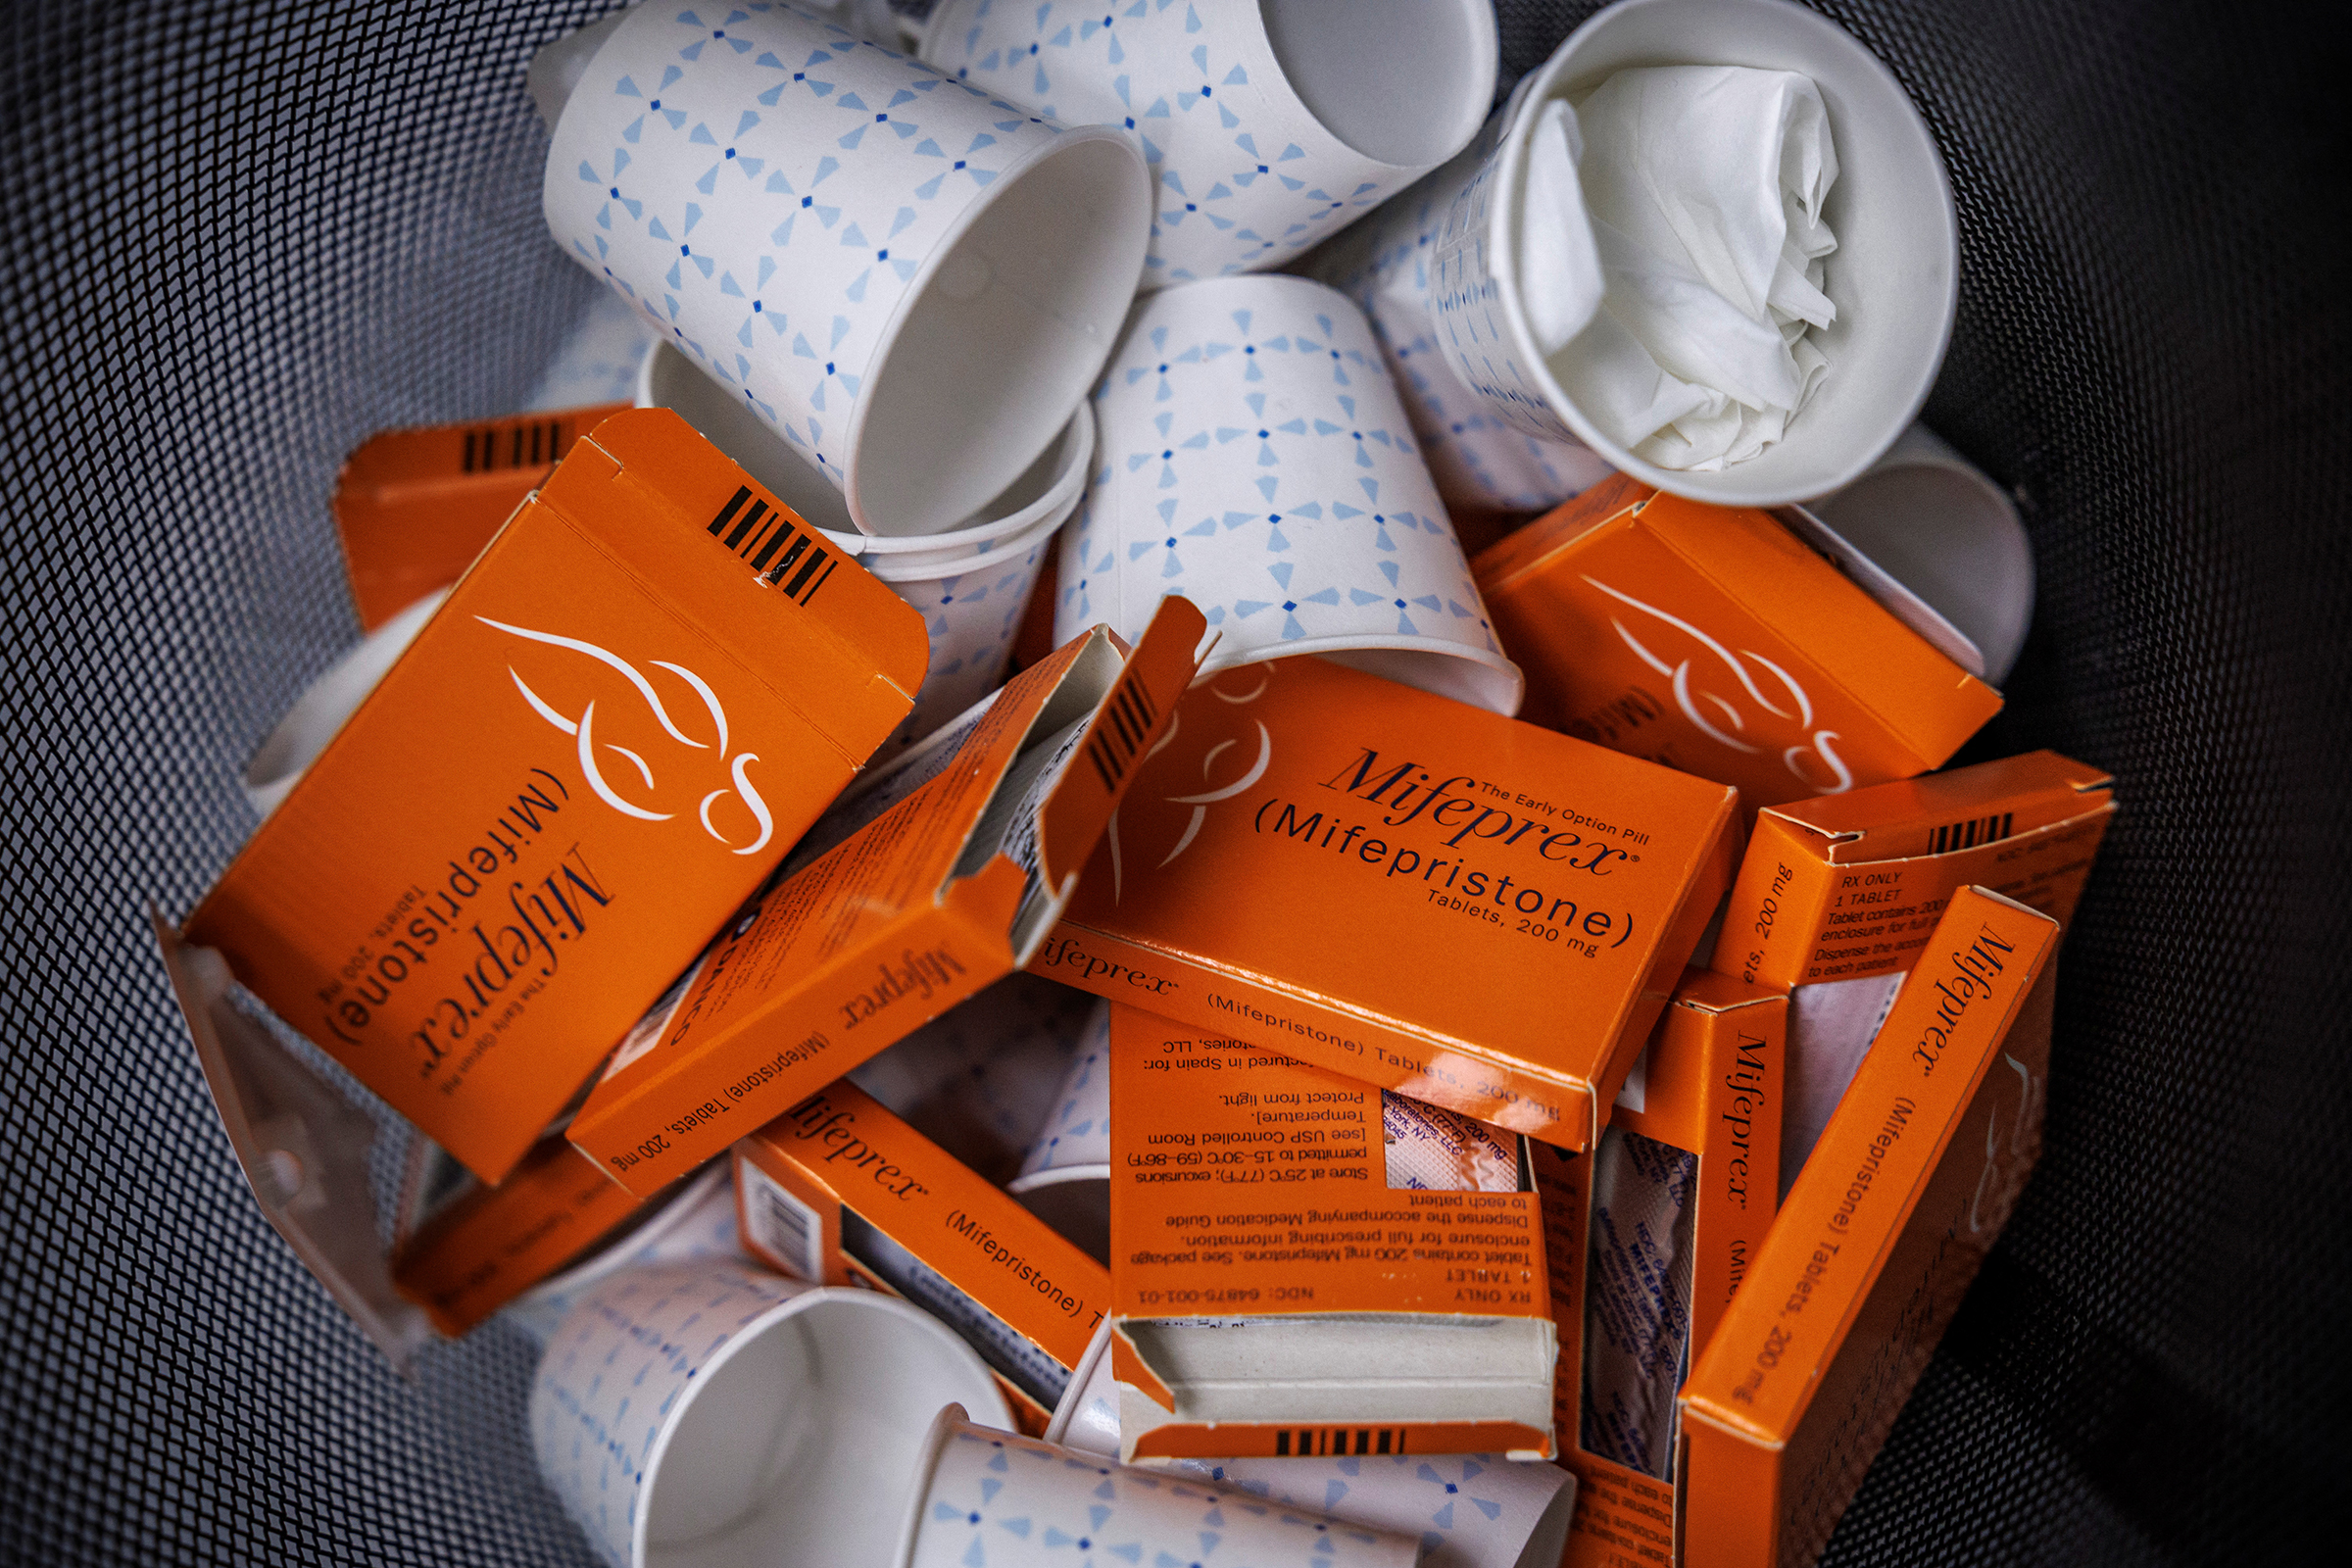 Empty boxes of mifepristone pills fill a trash can at Alamo Women's Clinic in Albuquerque, New Mexico, in January 2023.